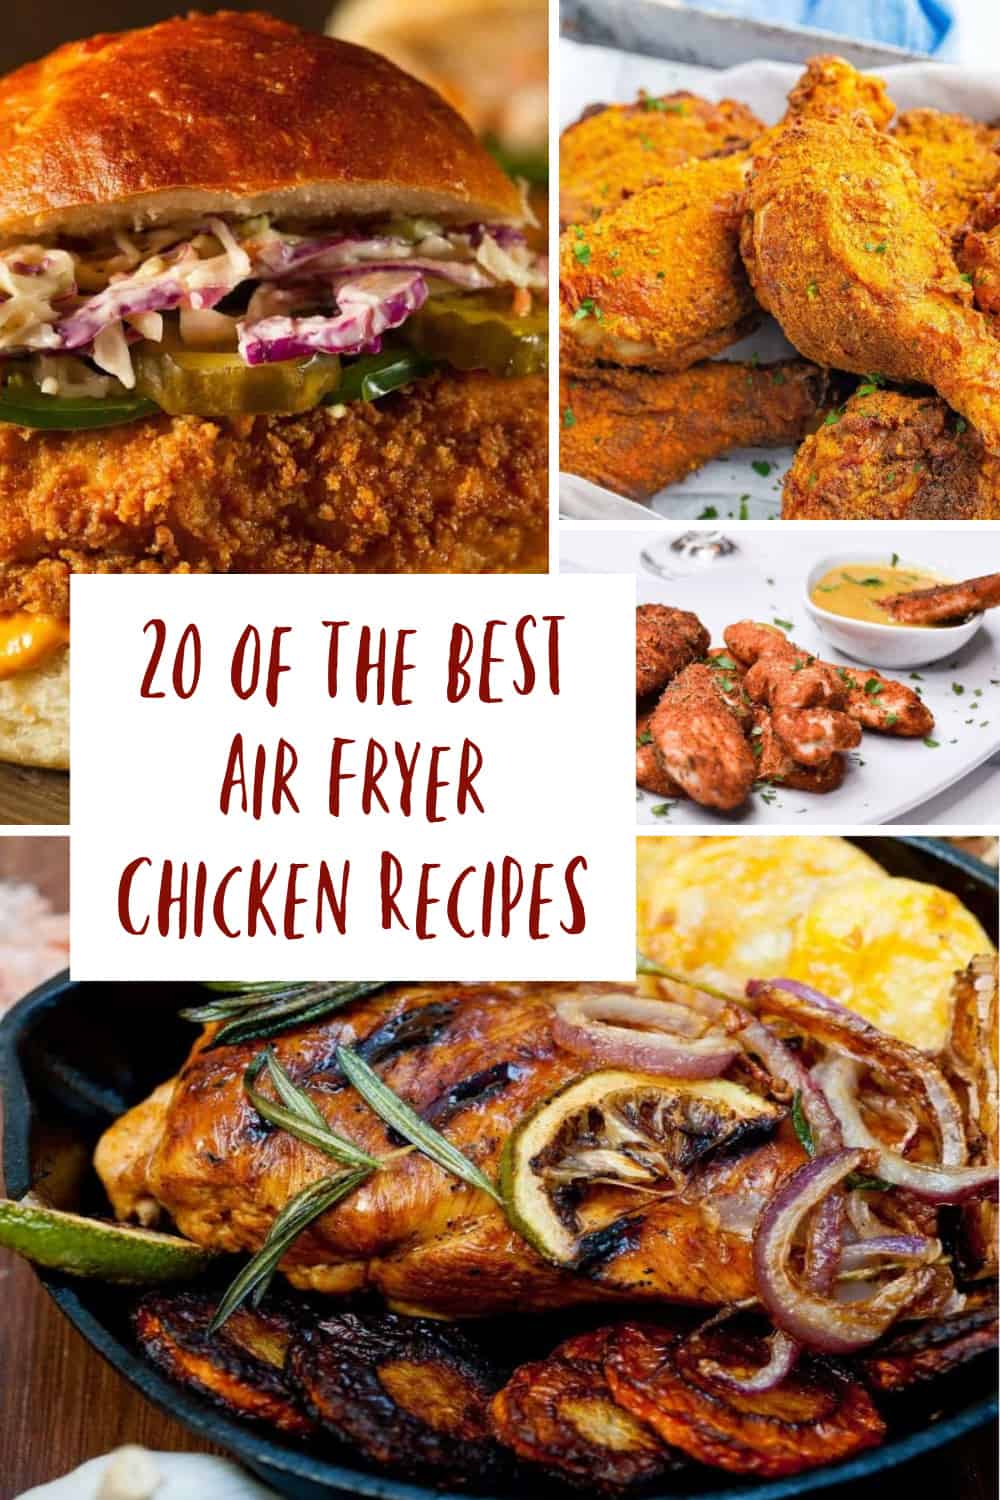 How to cook almost anything in an air fryer